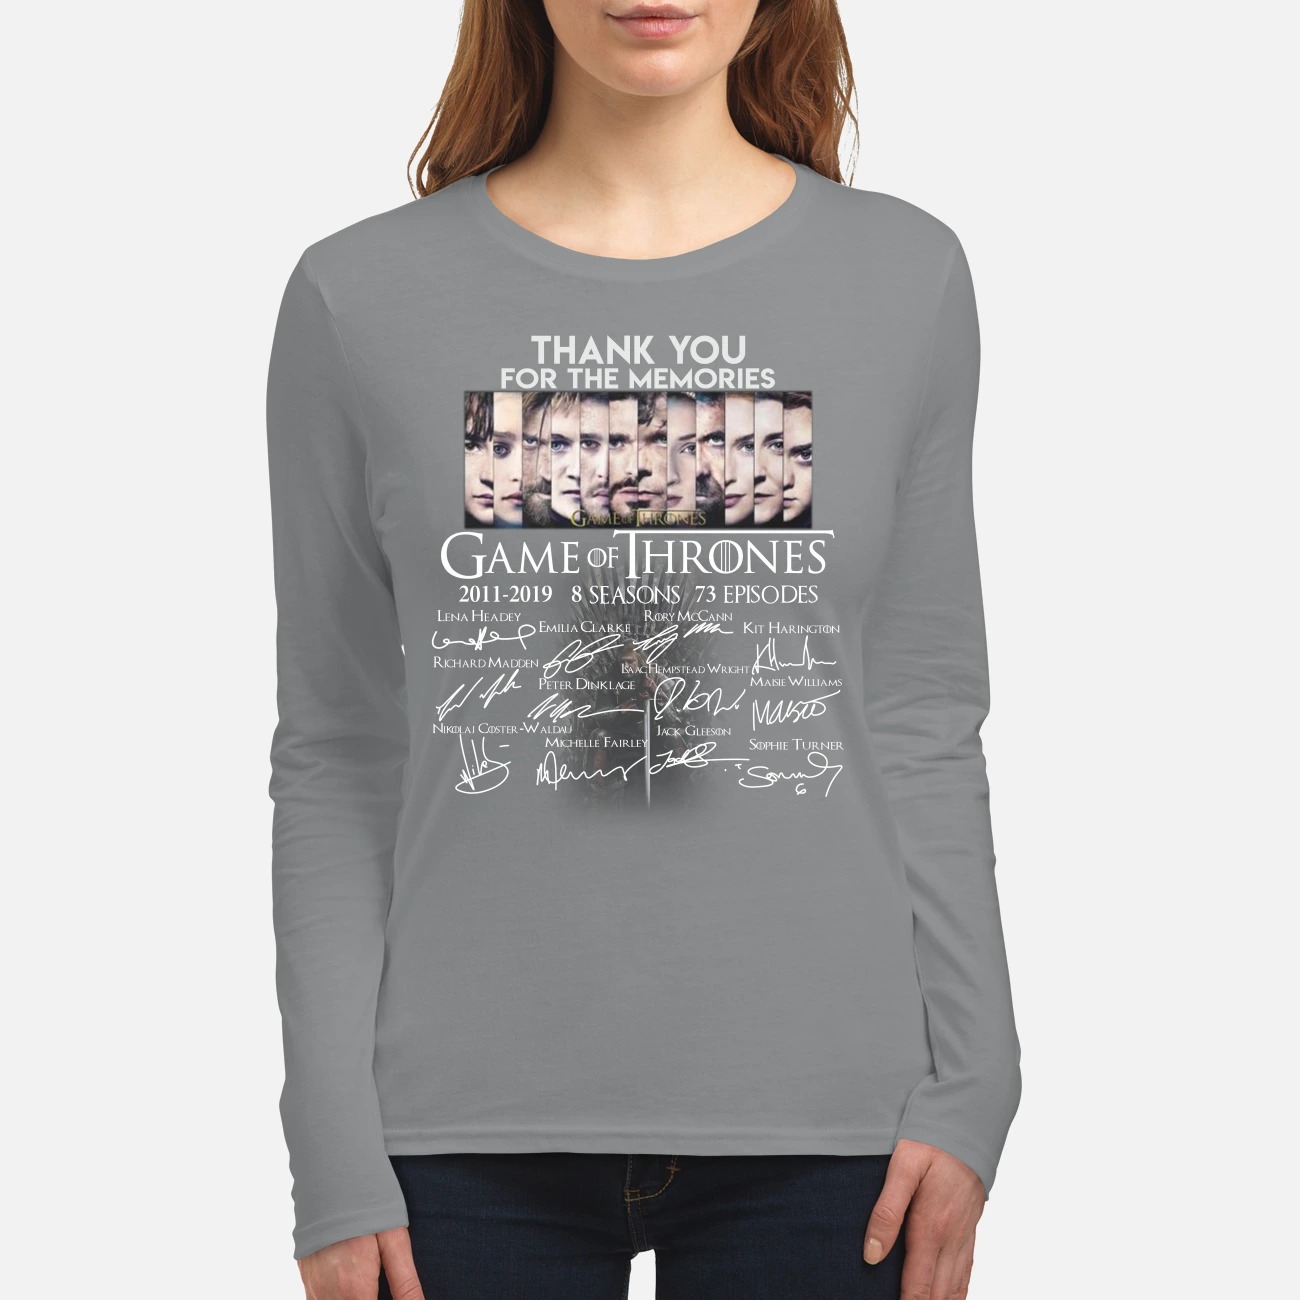 Thank you for the memories Game of Thrones women's long sleeved shirt